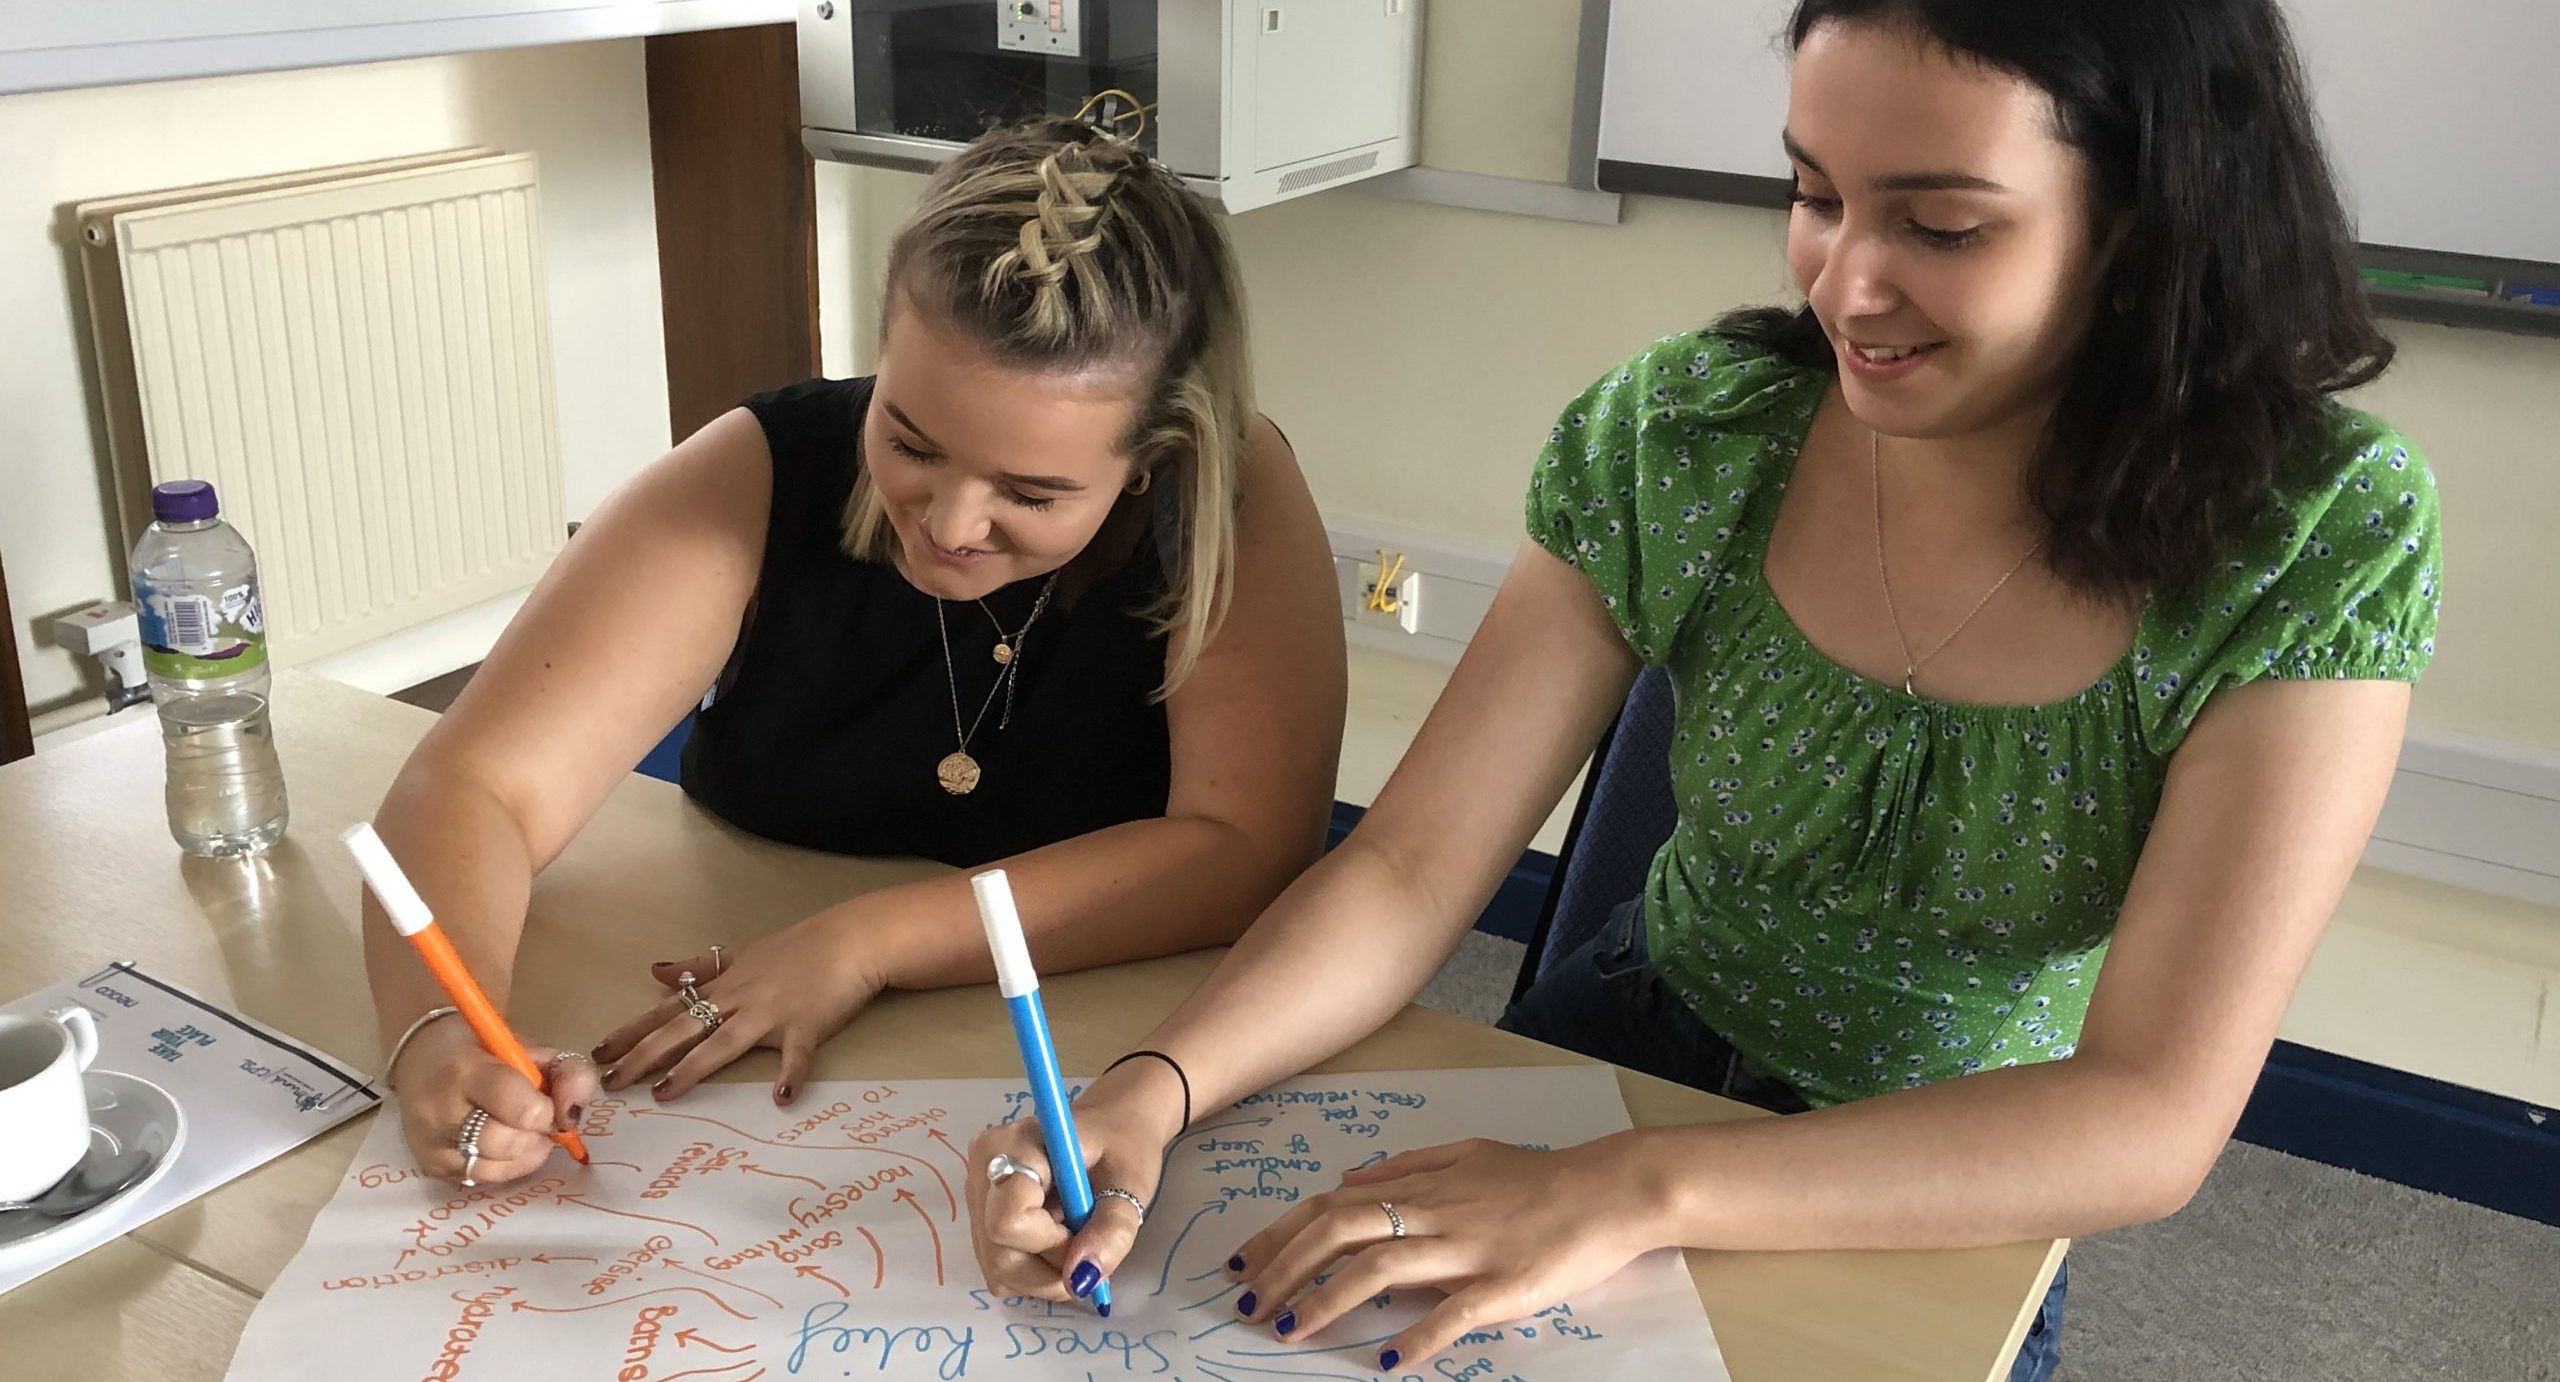 Two women drawing a Stress Relief spider diagram on a piece of paper